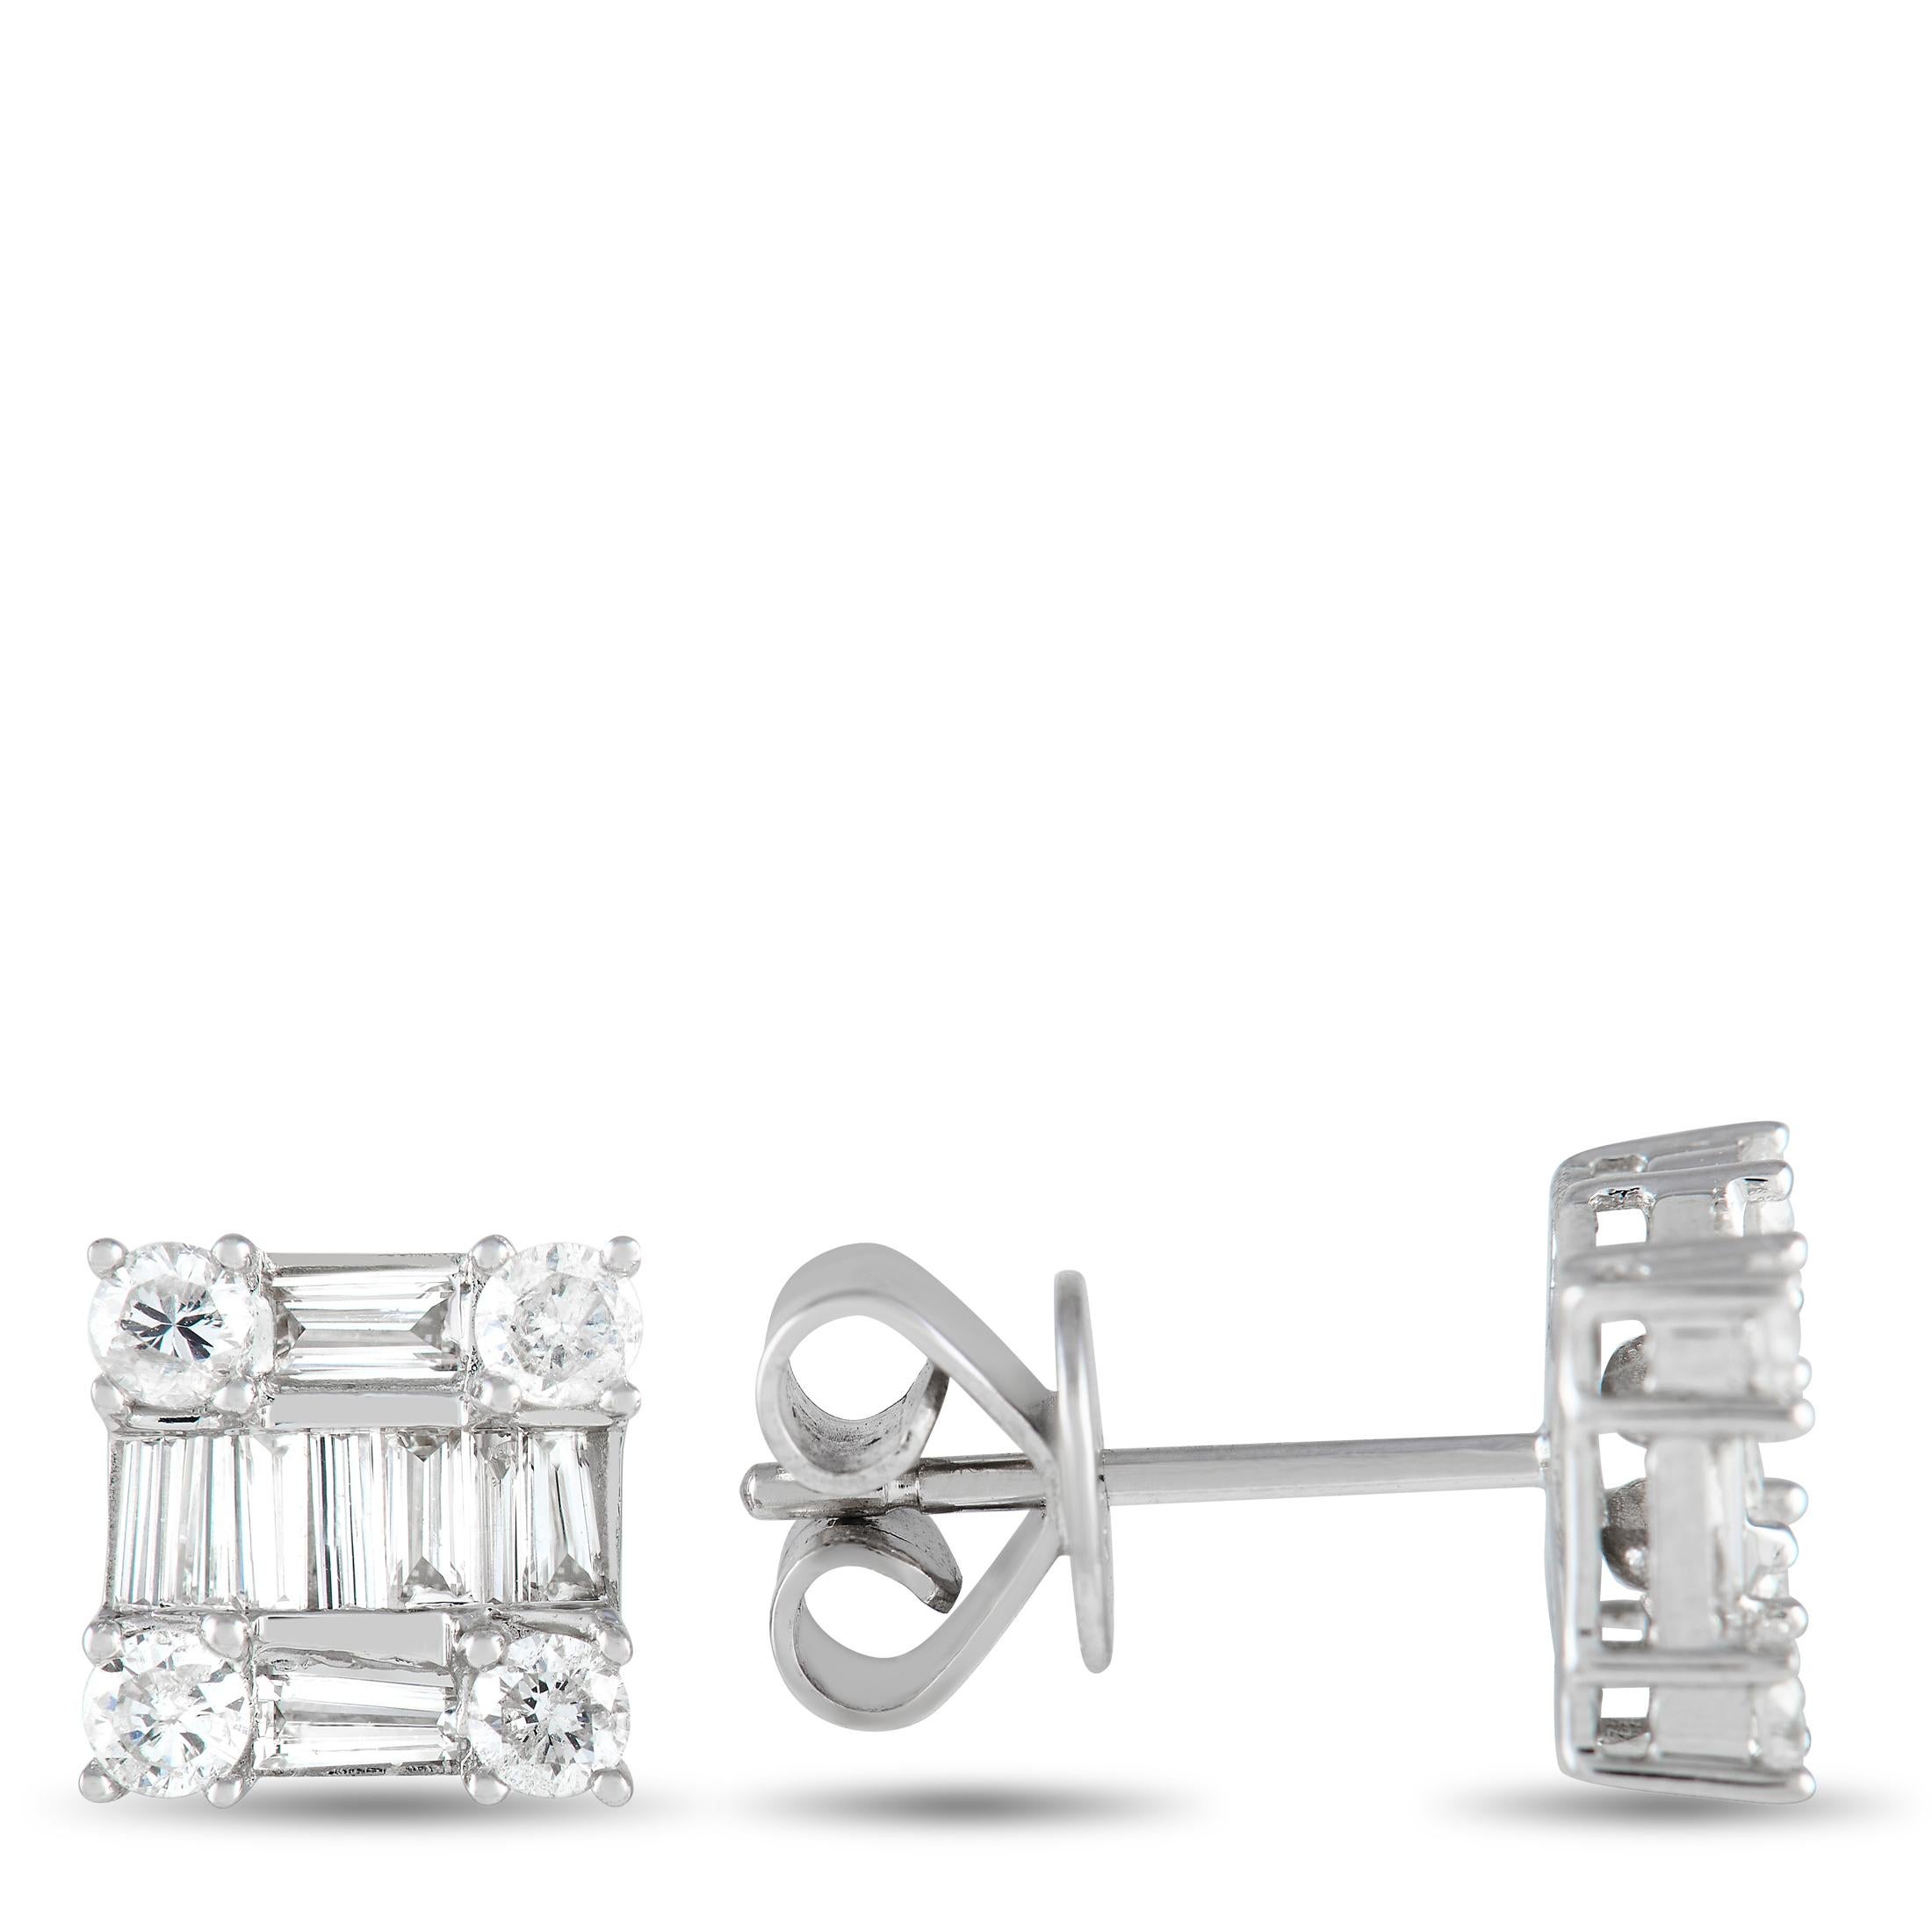 Lightweight, elegant, and versatile - these diamond studs are a worthy staple. Each earring measures 0.25 inches and features a square frame in 14K white gold. Covering the studs are baguette diamonds and round diamonds arranged in a symmetrical